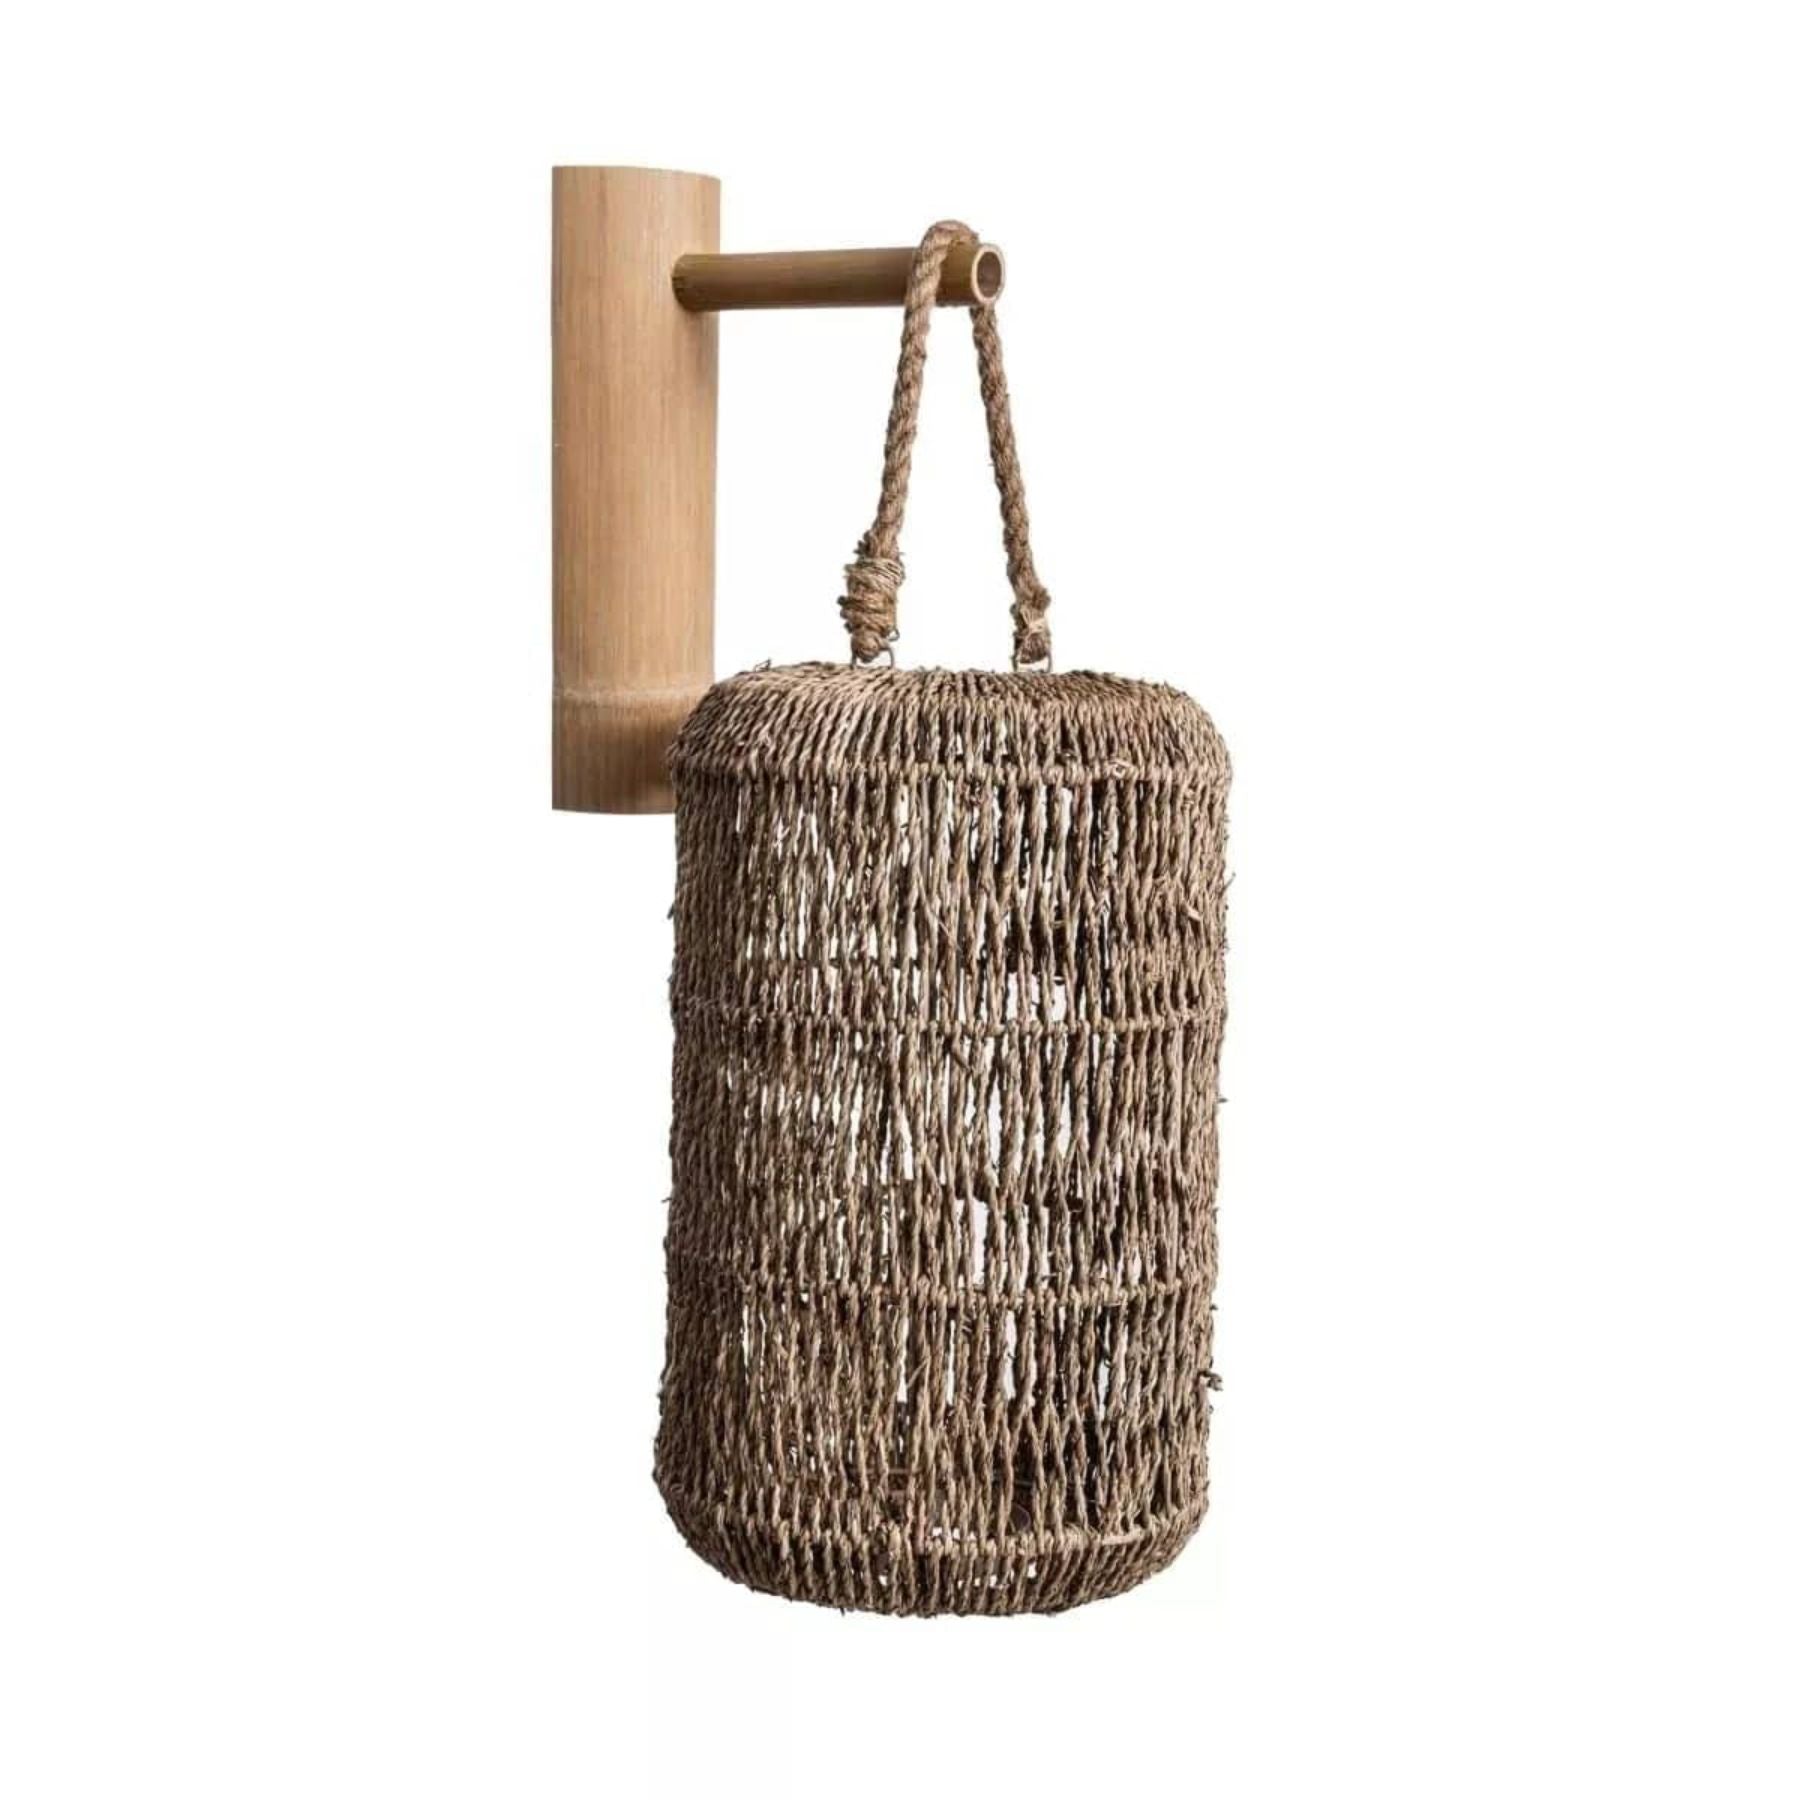 kai jute lantern lamps interwoven with the gentle charm of a loose weave gracefully enhance the aesthetics of any open garden